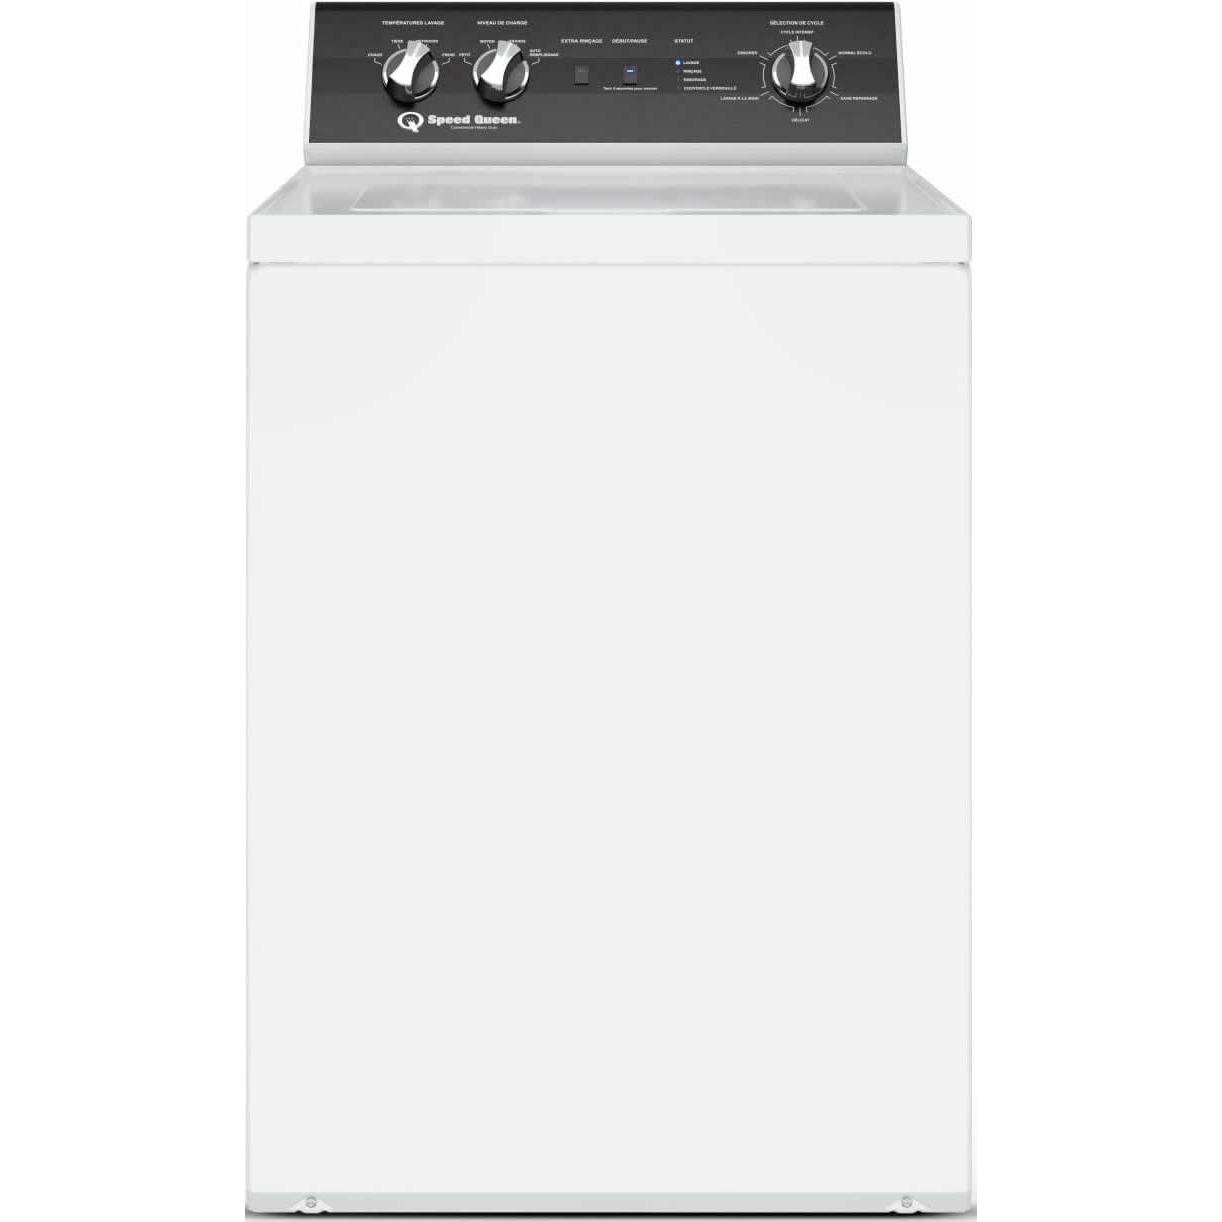 Speed Queen Laundry TR5003WN, DR5003WG